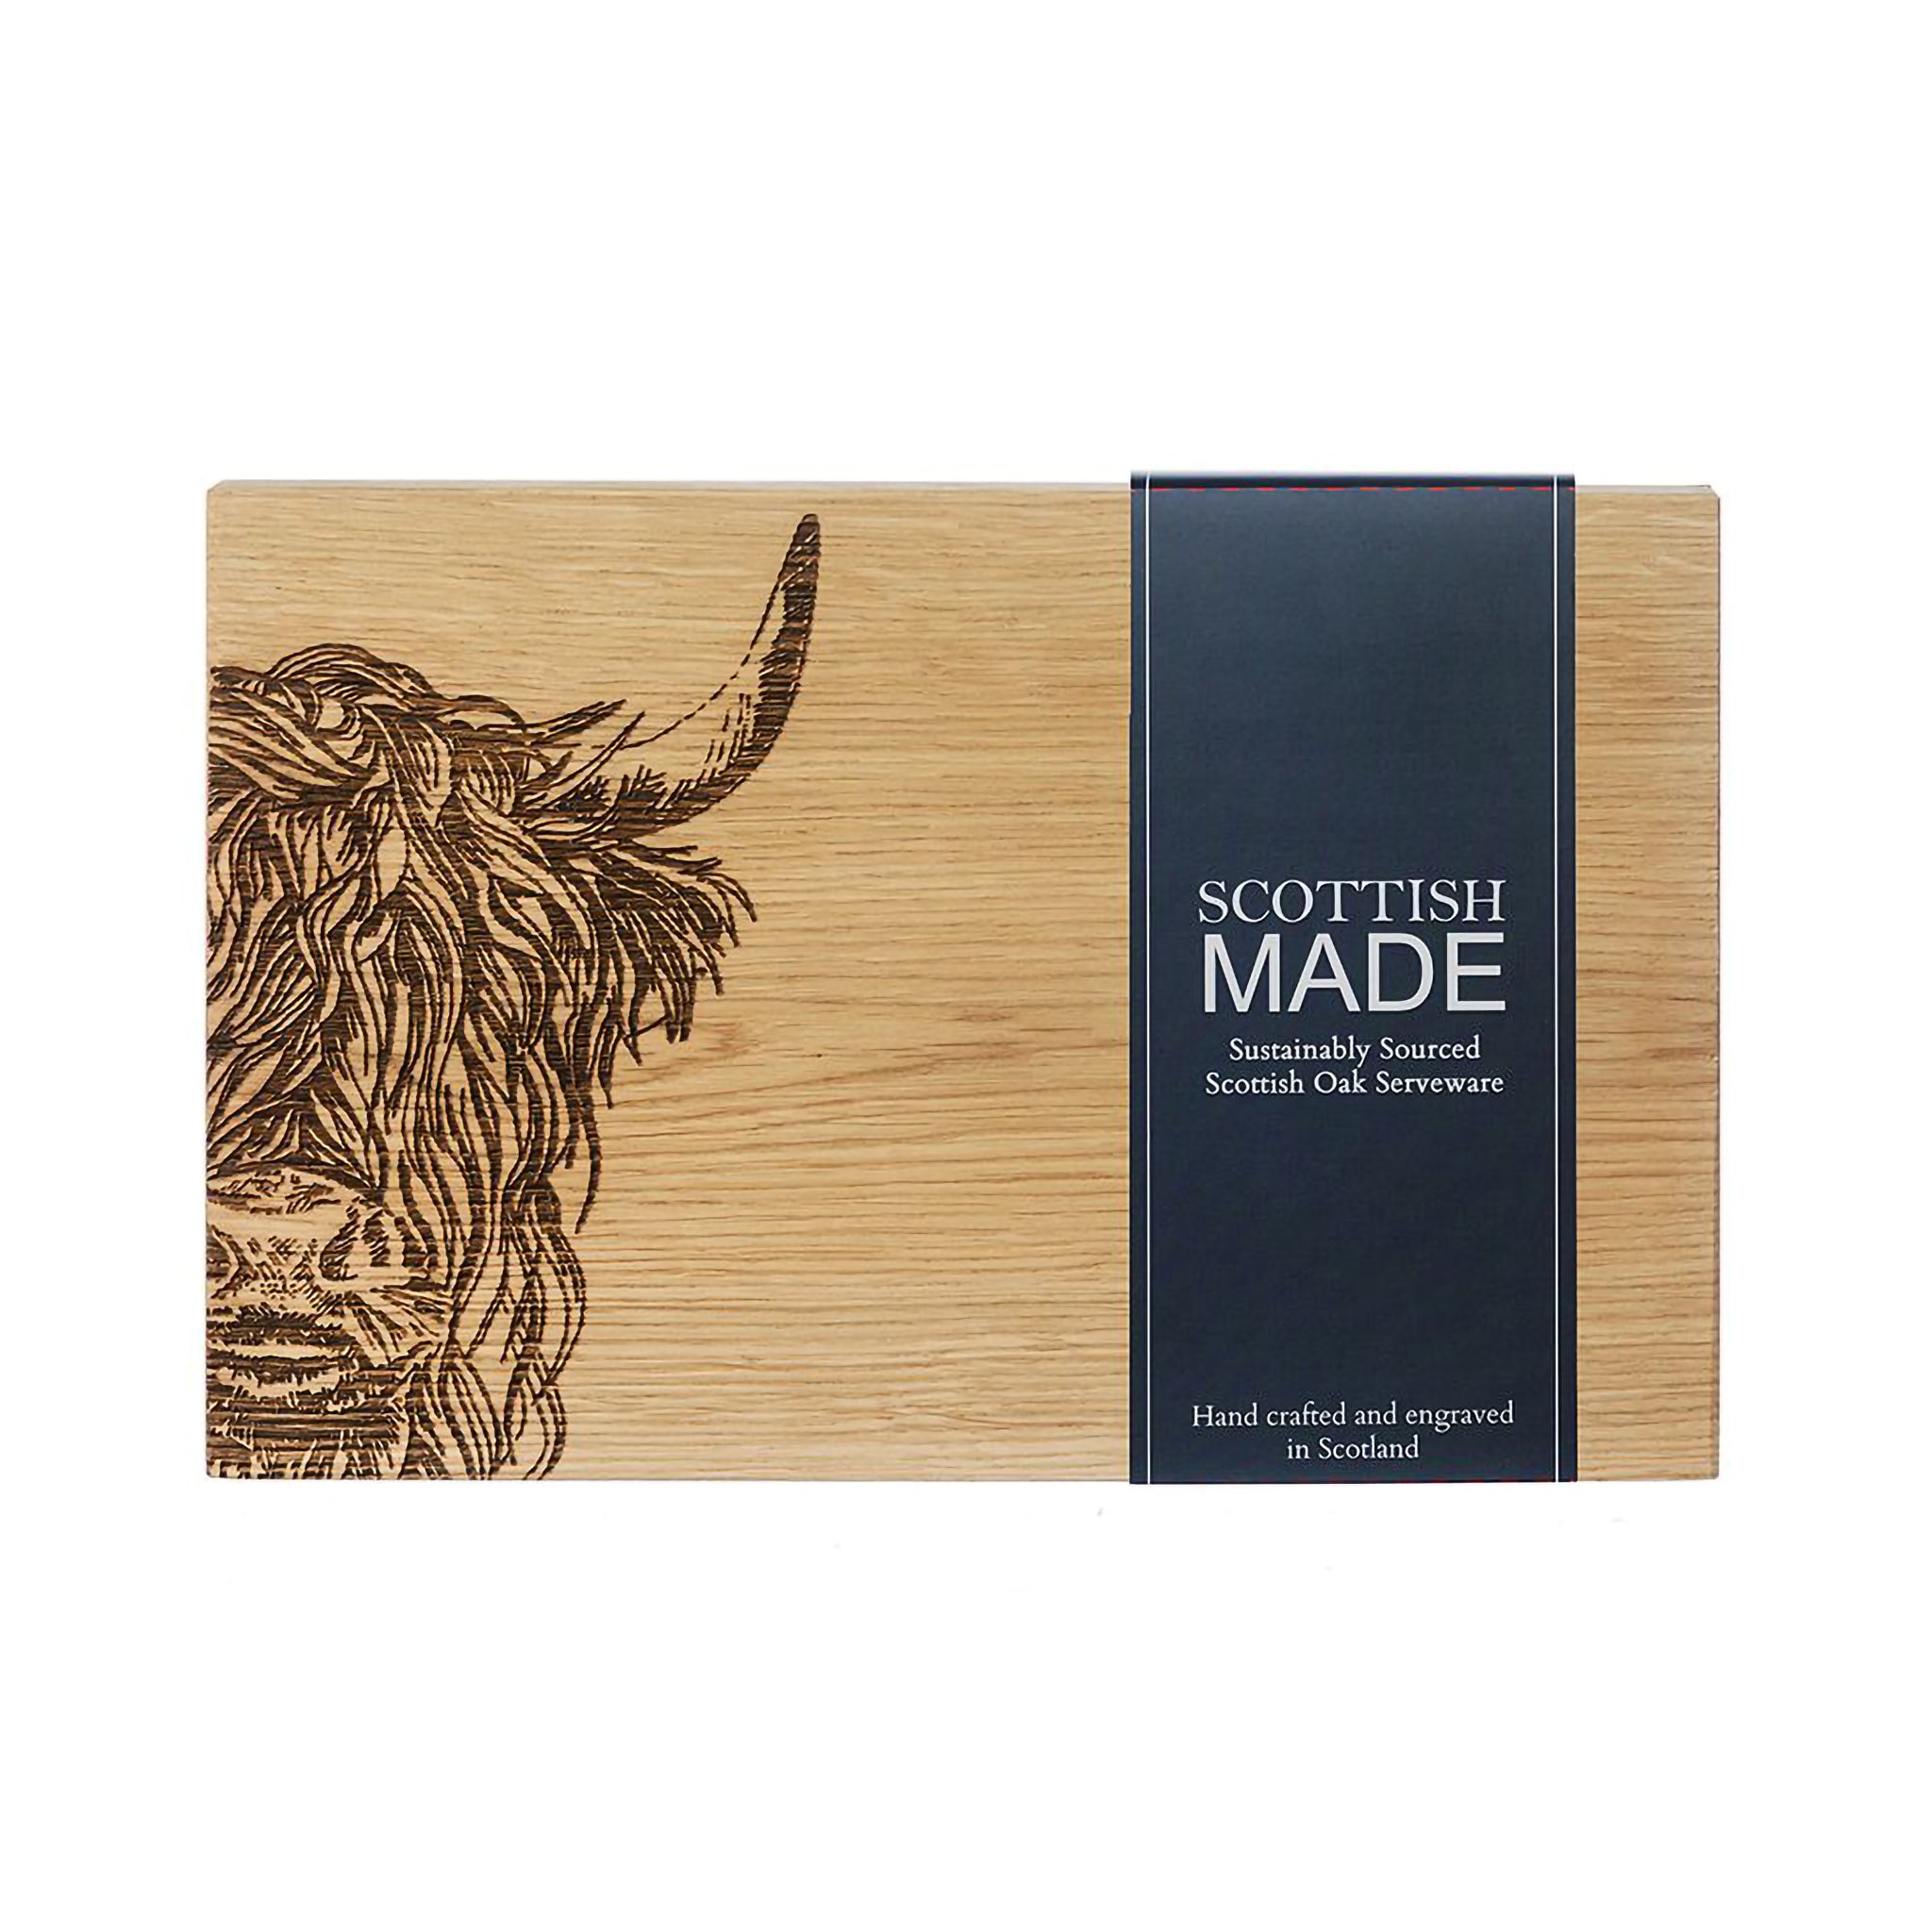 Wooden cutting board with engraved Highland cow and packaging sleeve